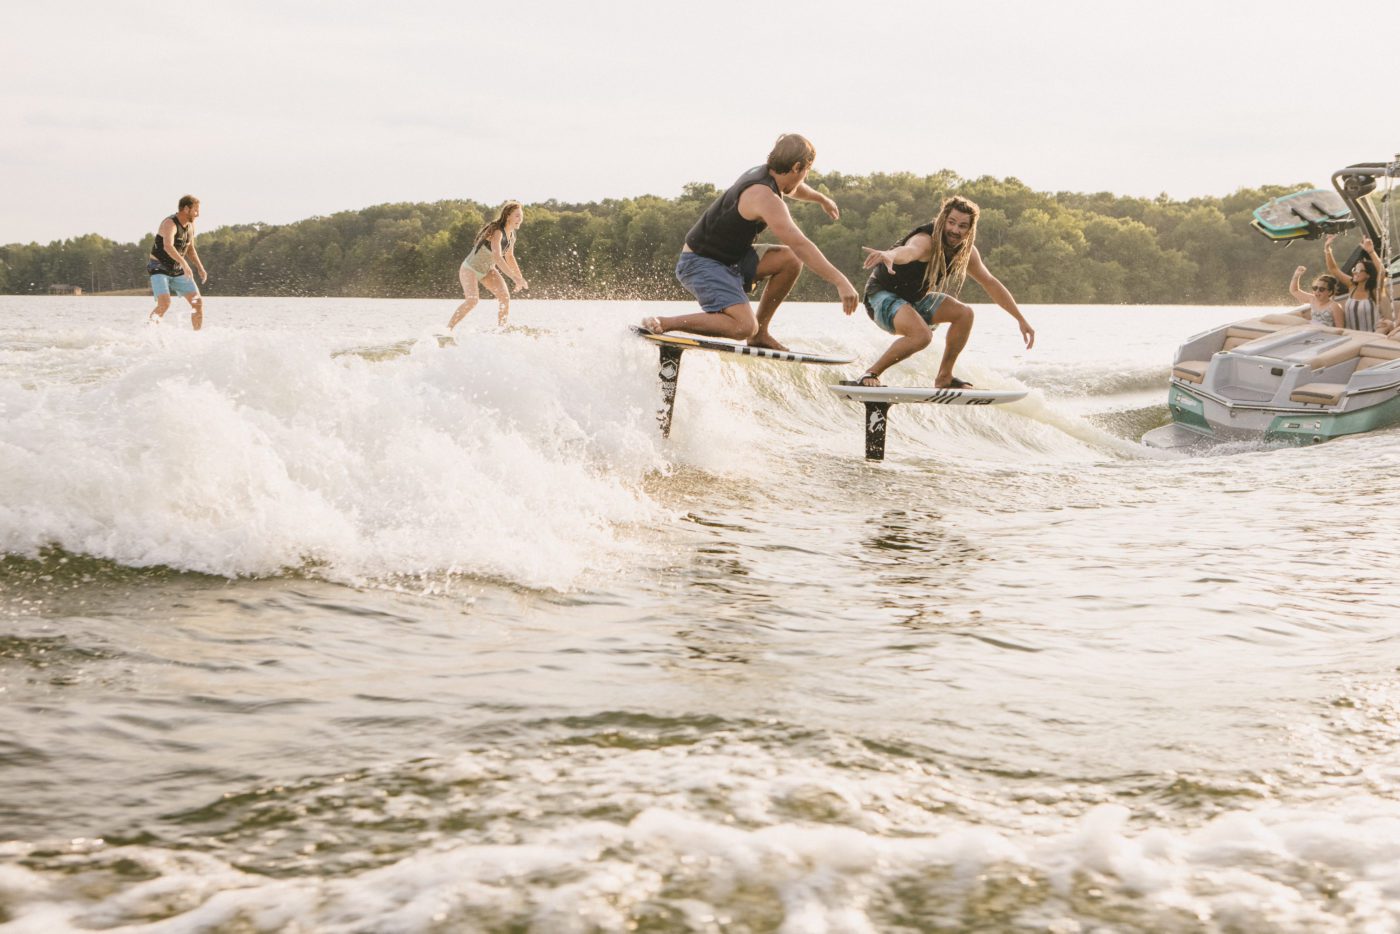 MasterCraft boats creating wakes for surfers